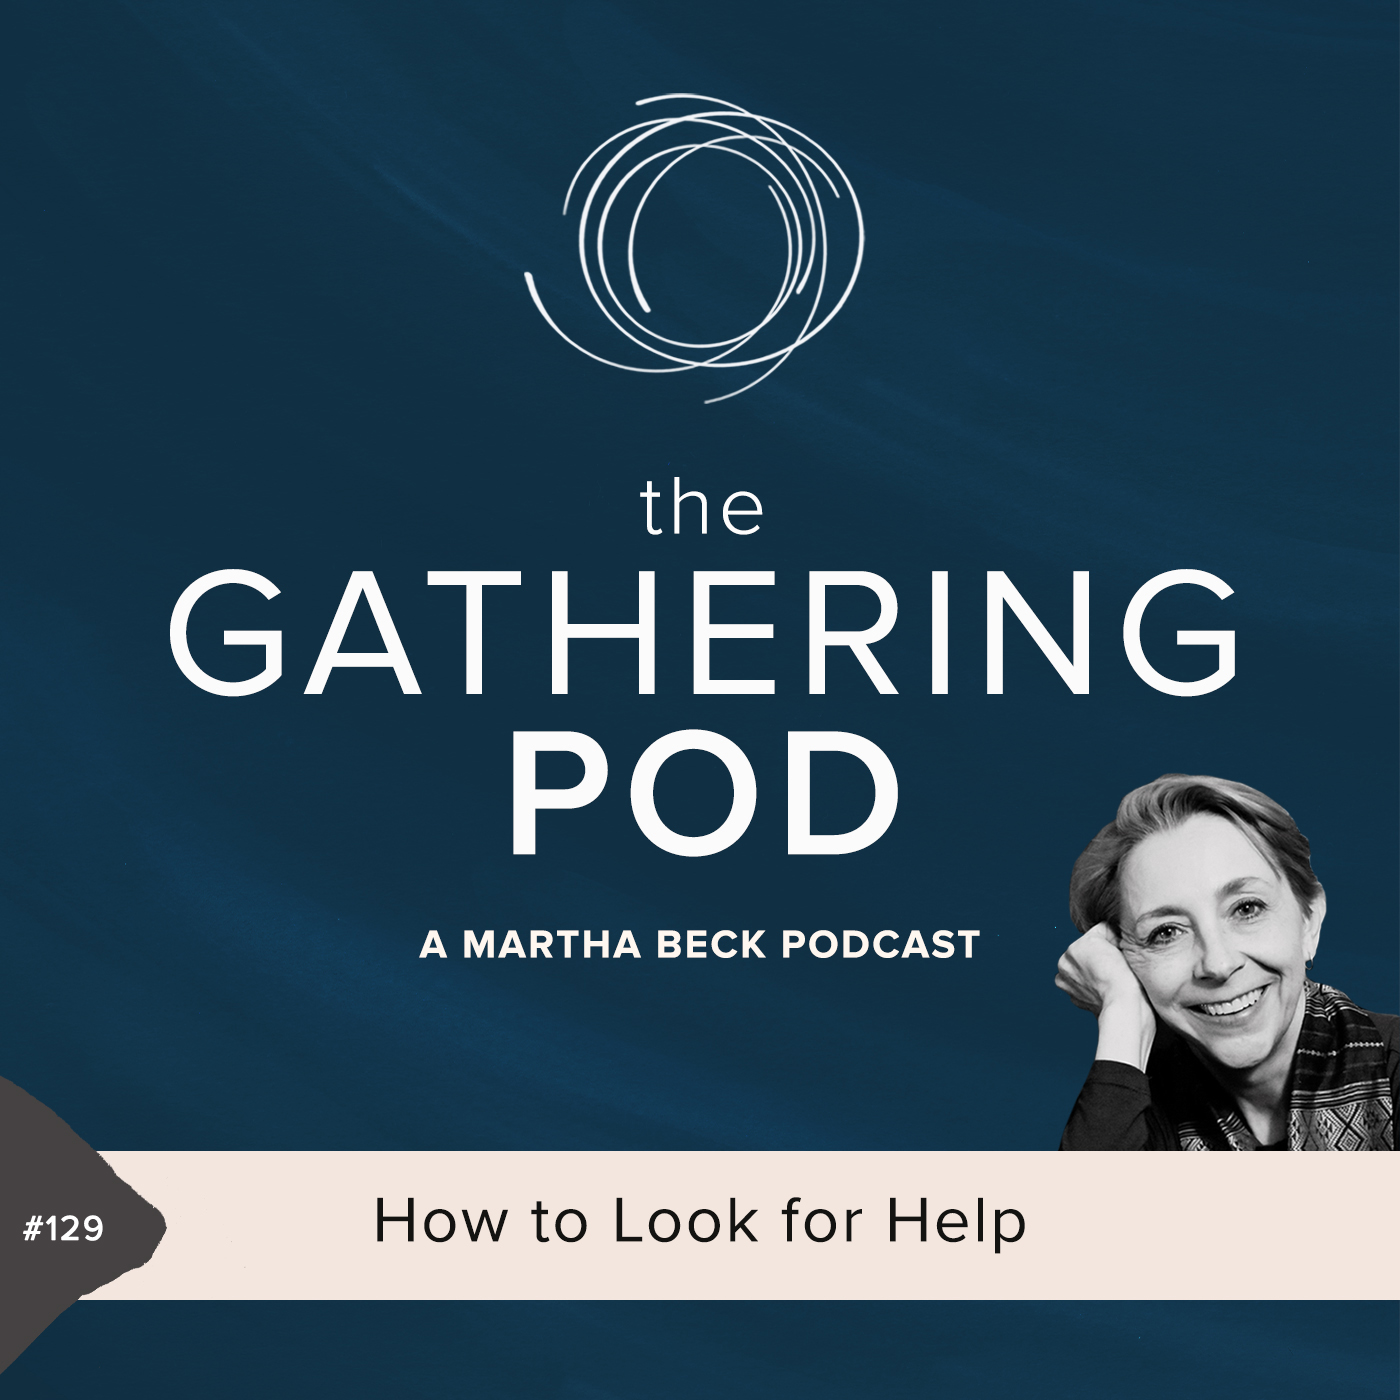 Image for The Gathering Pod A Martha Beck Podcast Episode #129 How to Look for Help